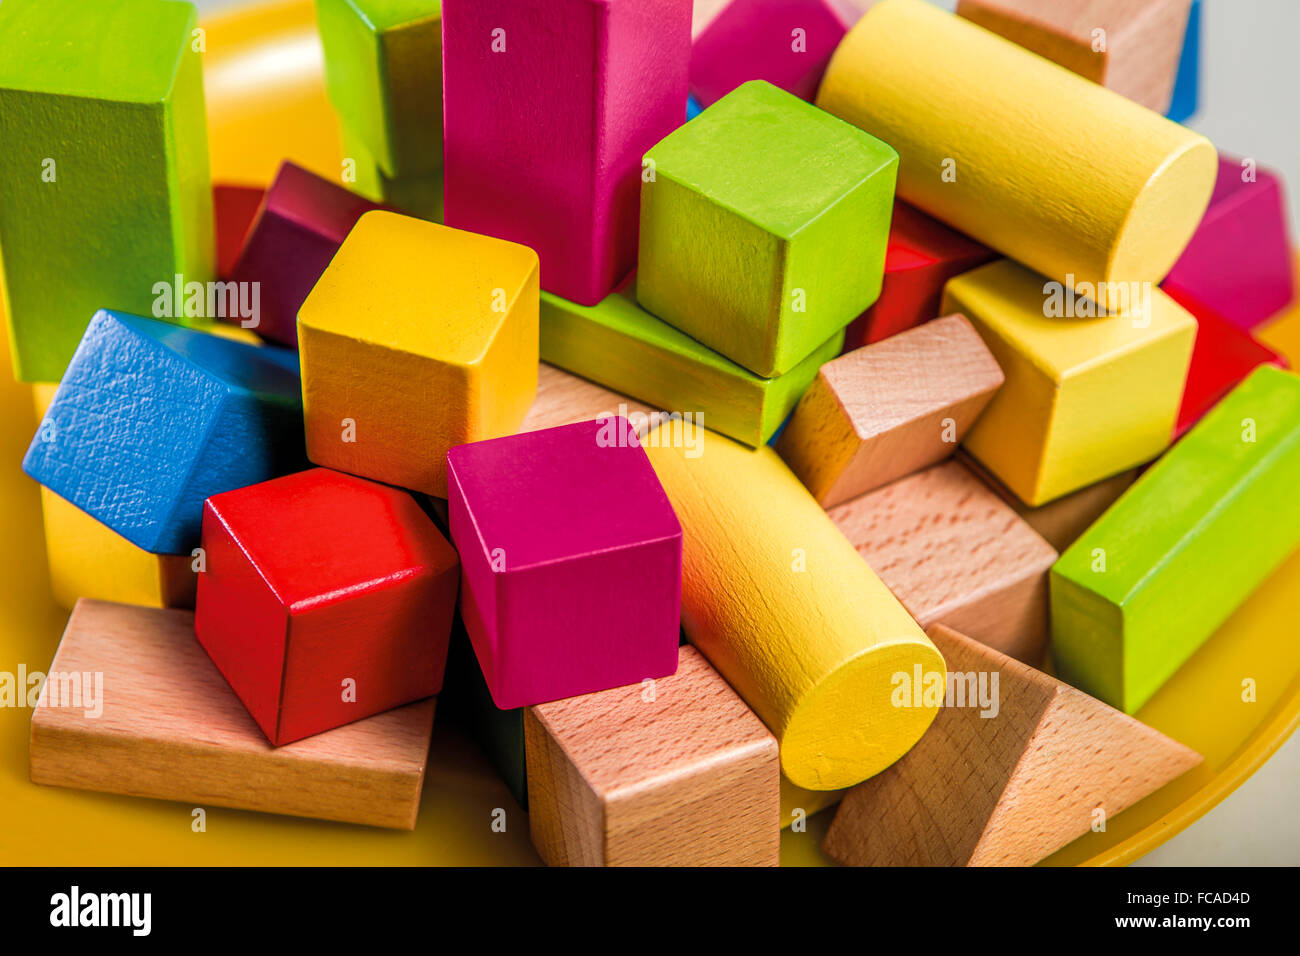 Untidy variety wooden colorful blocks Stock Photo